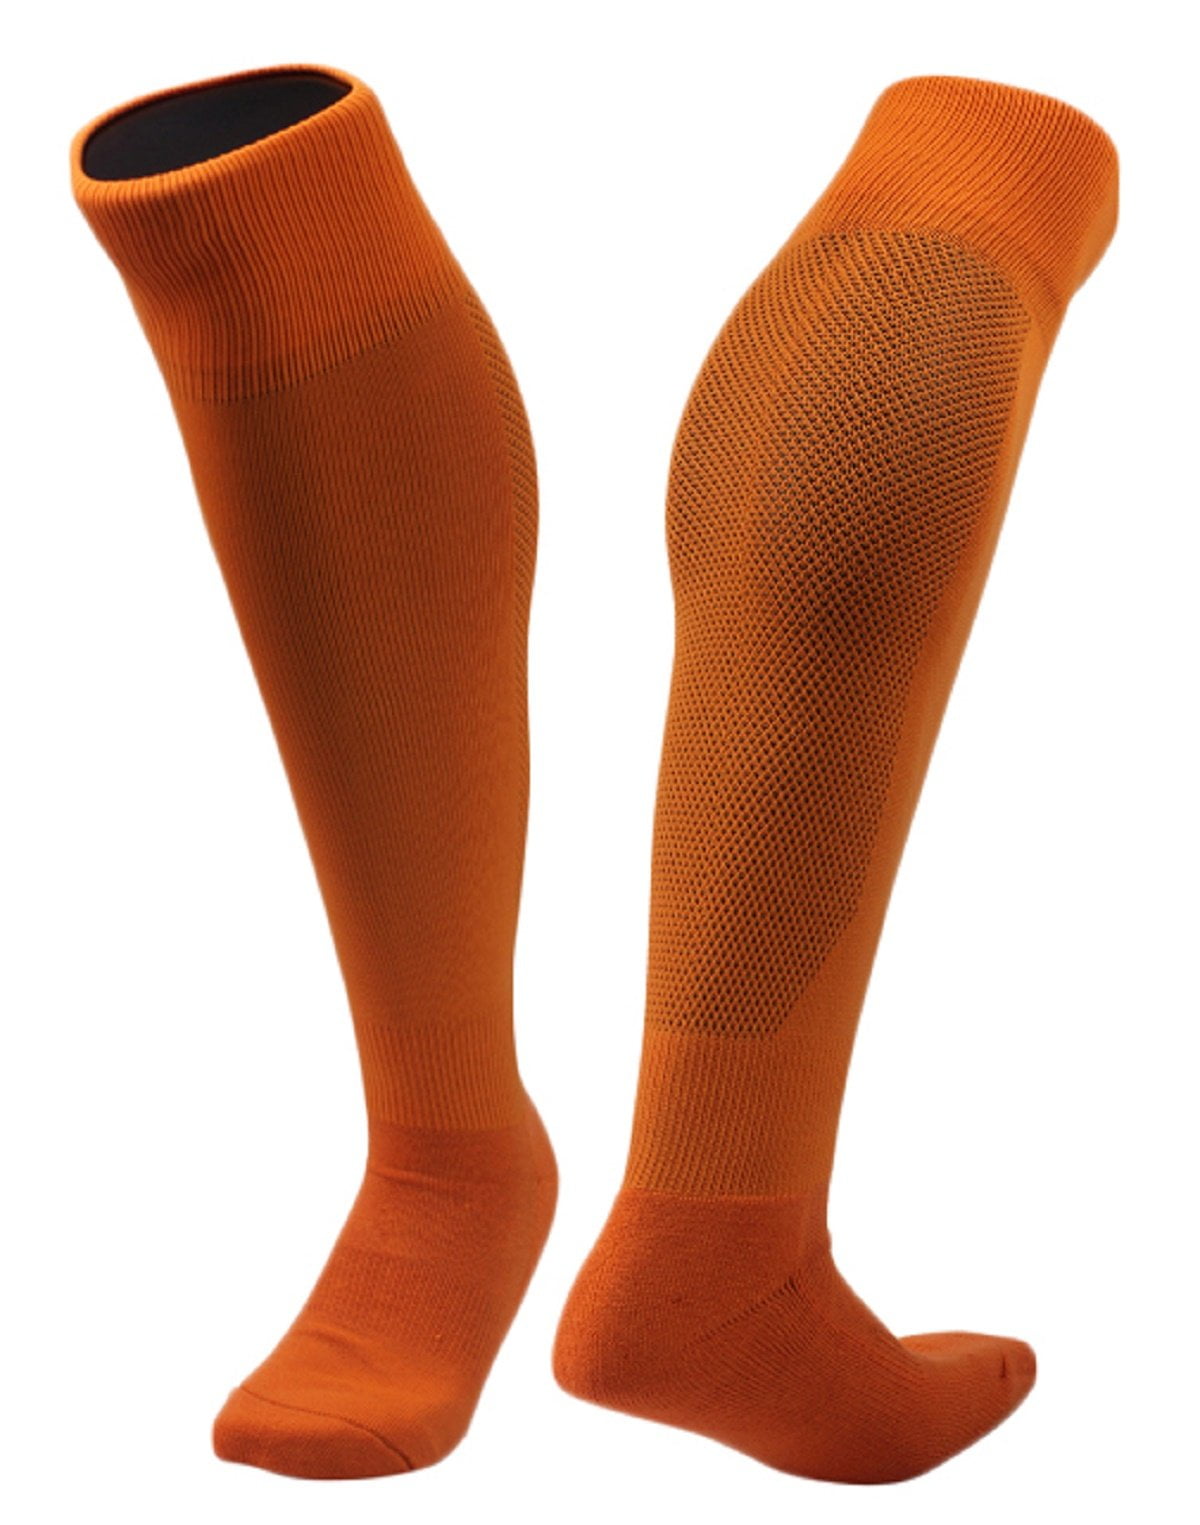 Meso Men's 1 Pair Extremely Durable Knee High Sports Socks - Fitness &  Workout Clothing, Gym, Gear or Fashion Socks XL005 Size MOrange -  